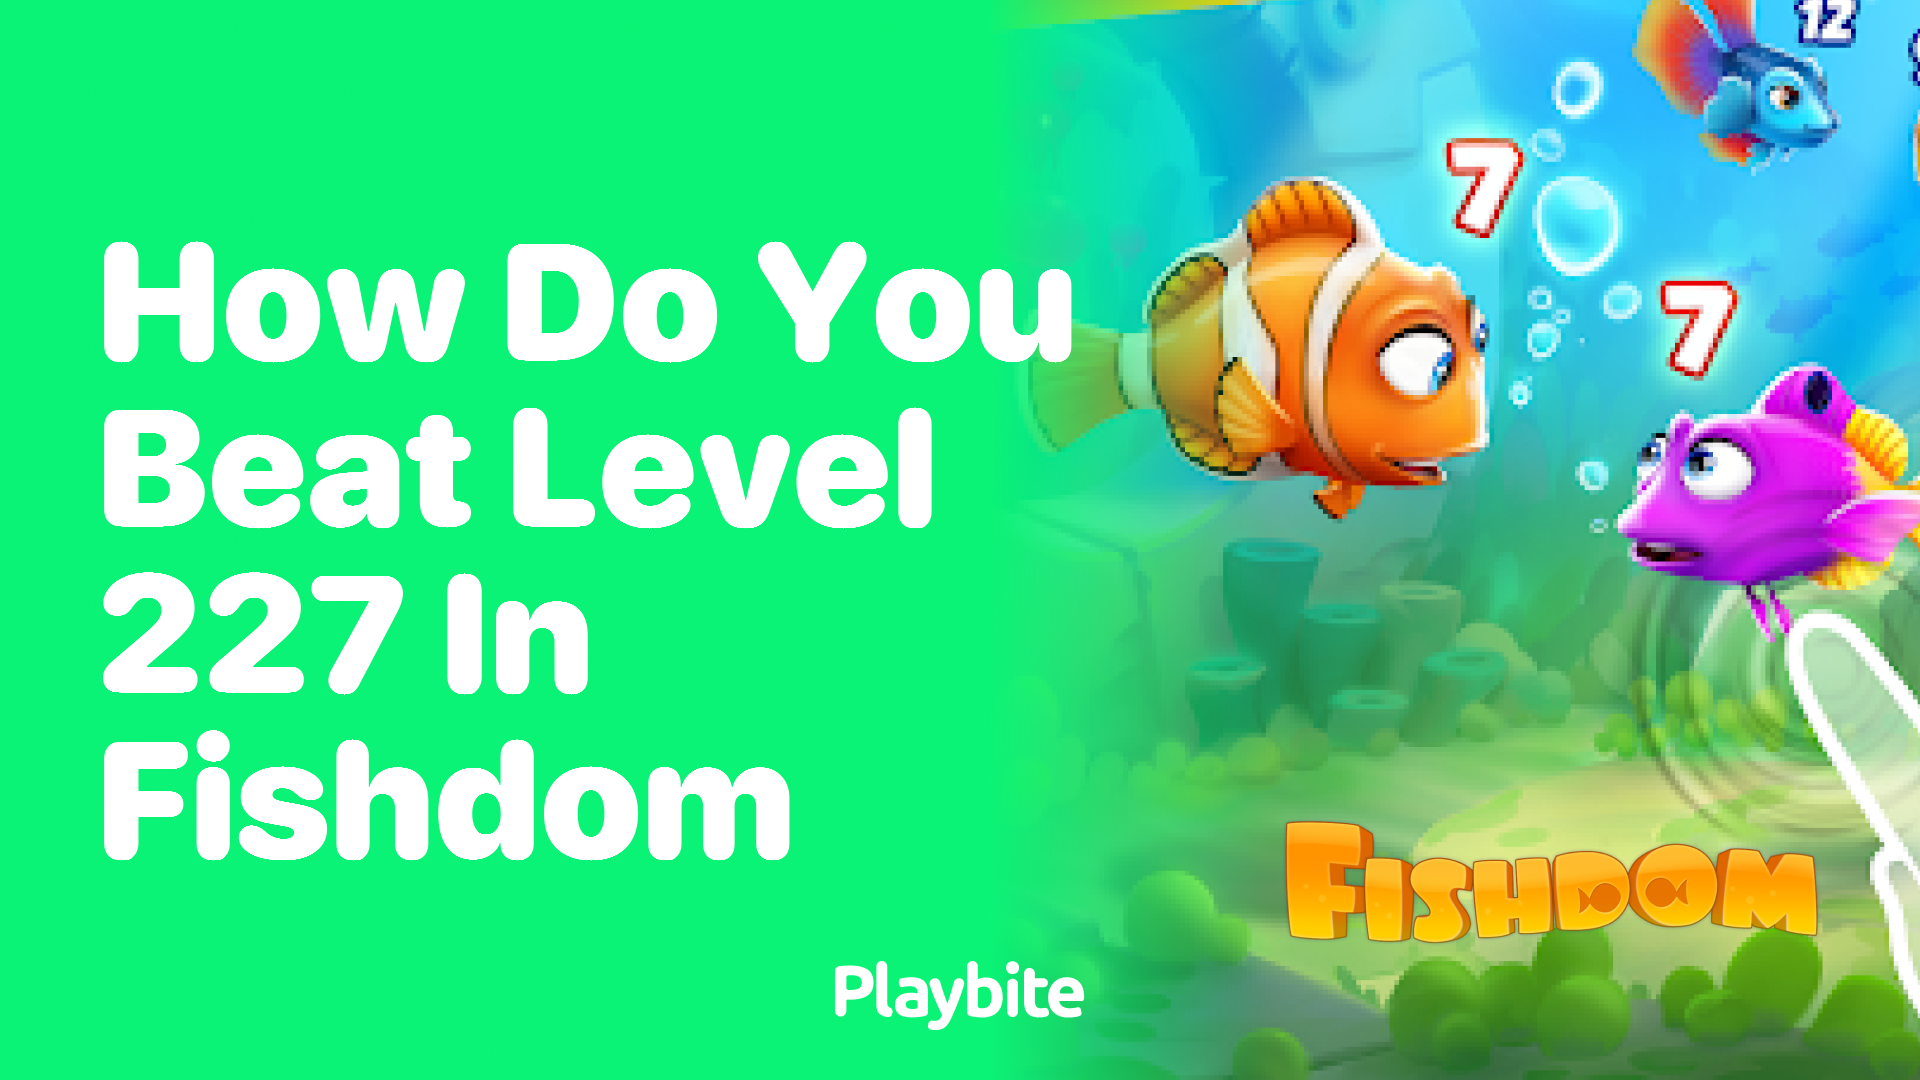 How Do You Beat Level 227 in Fishdom?